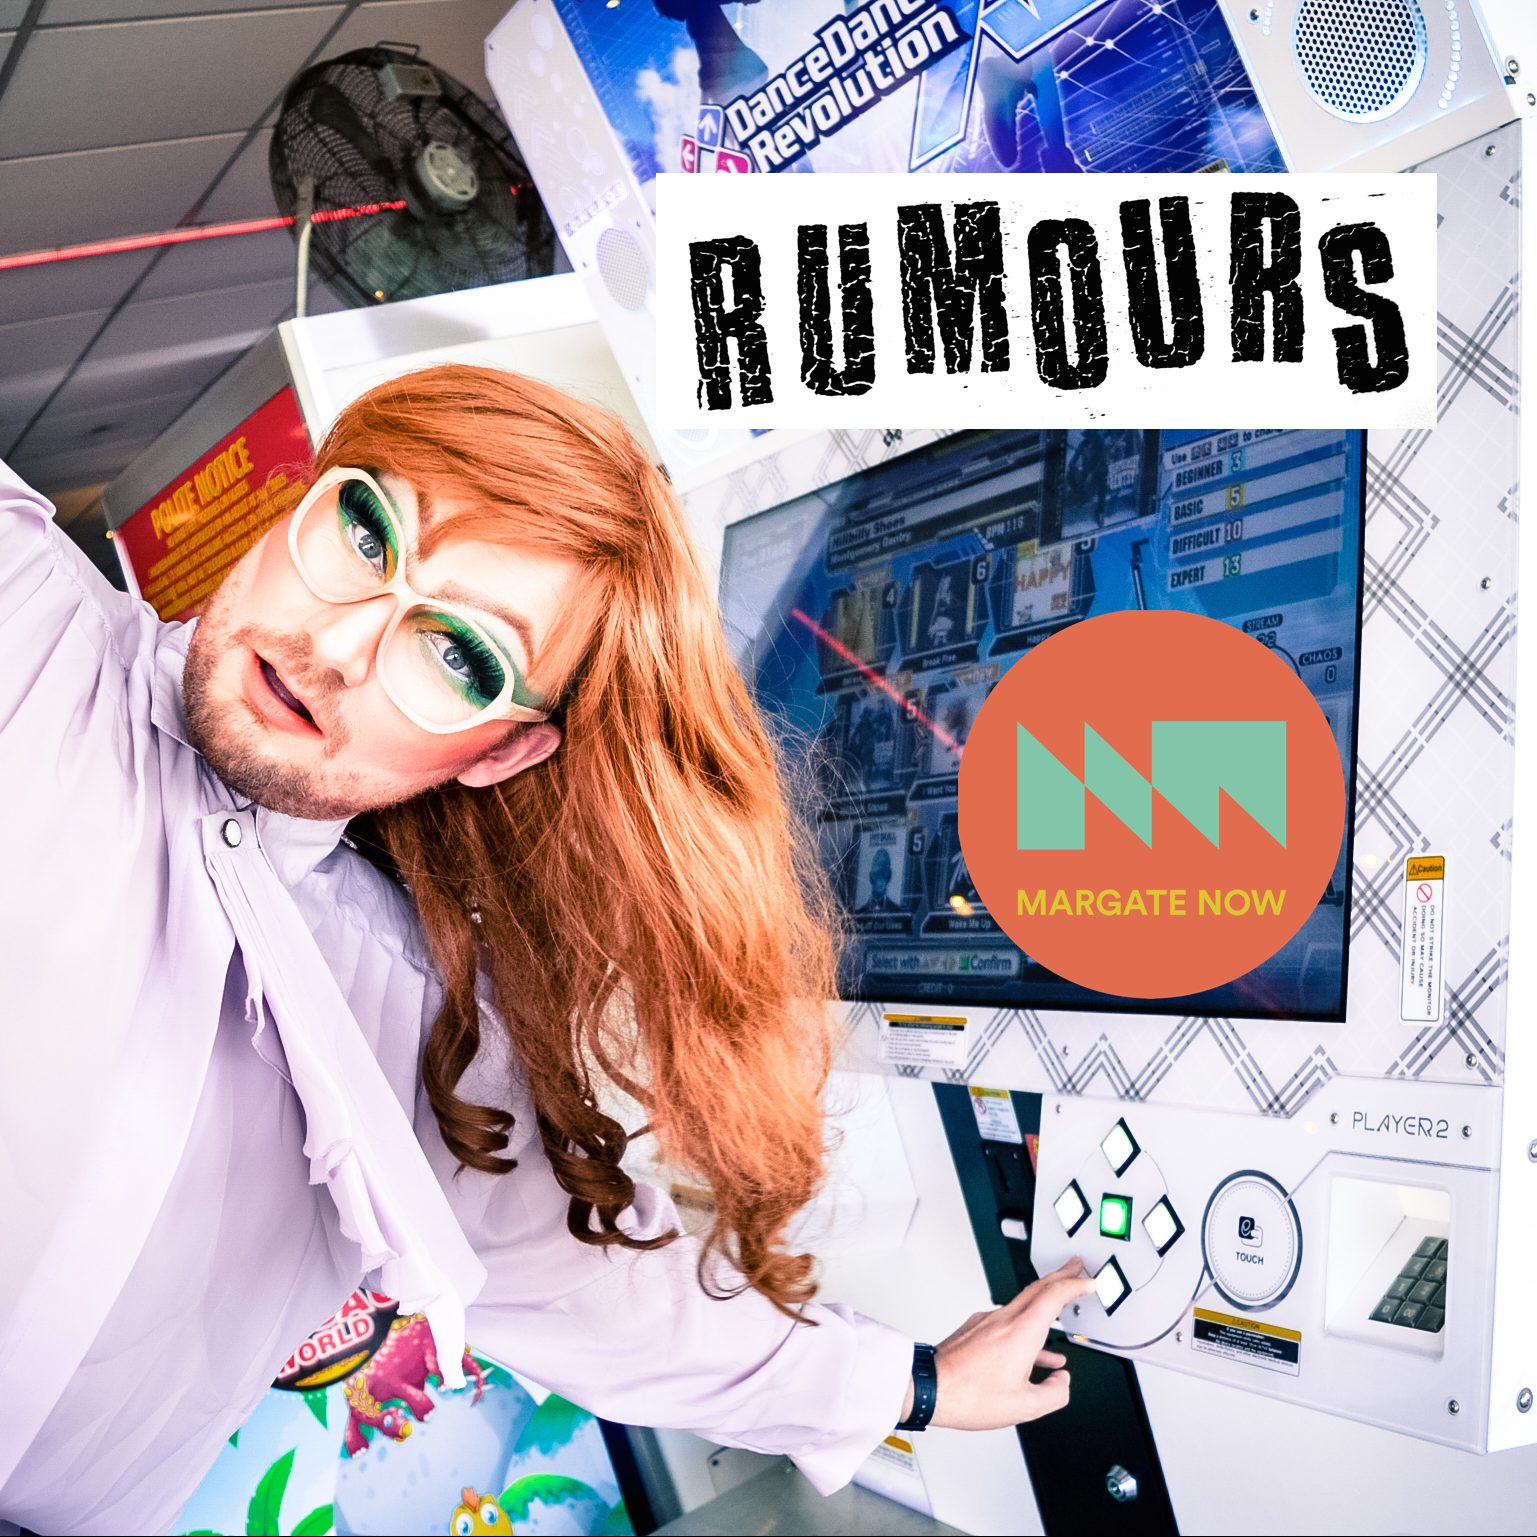 Rumours Event 3 12 Oct_Bob Chicalors_image Larnen Hawker_Margate Now festival 2019